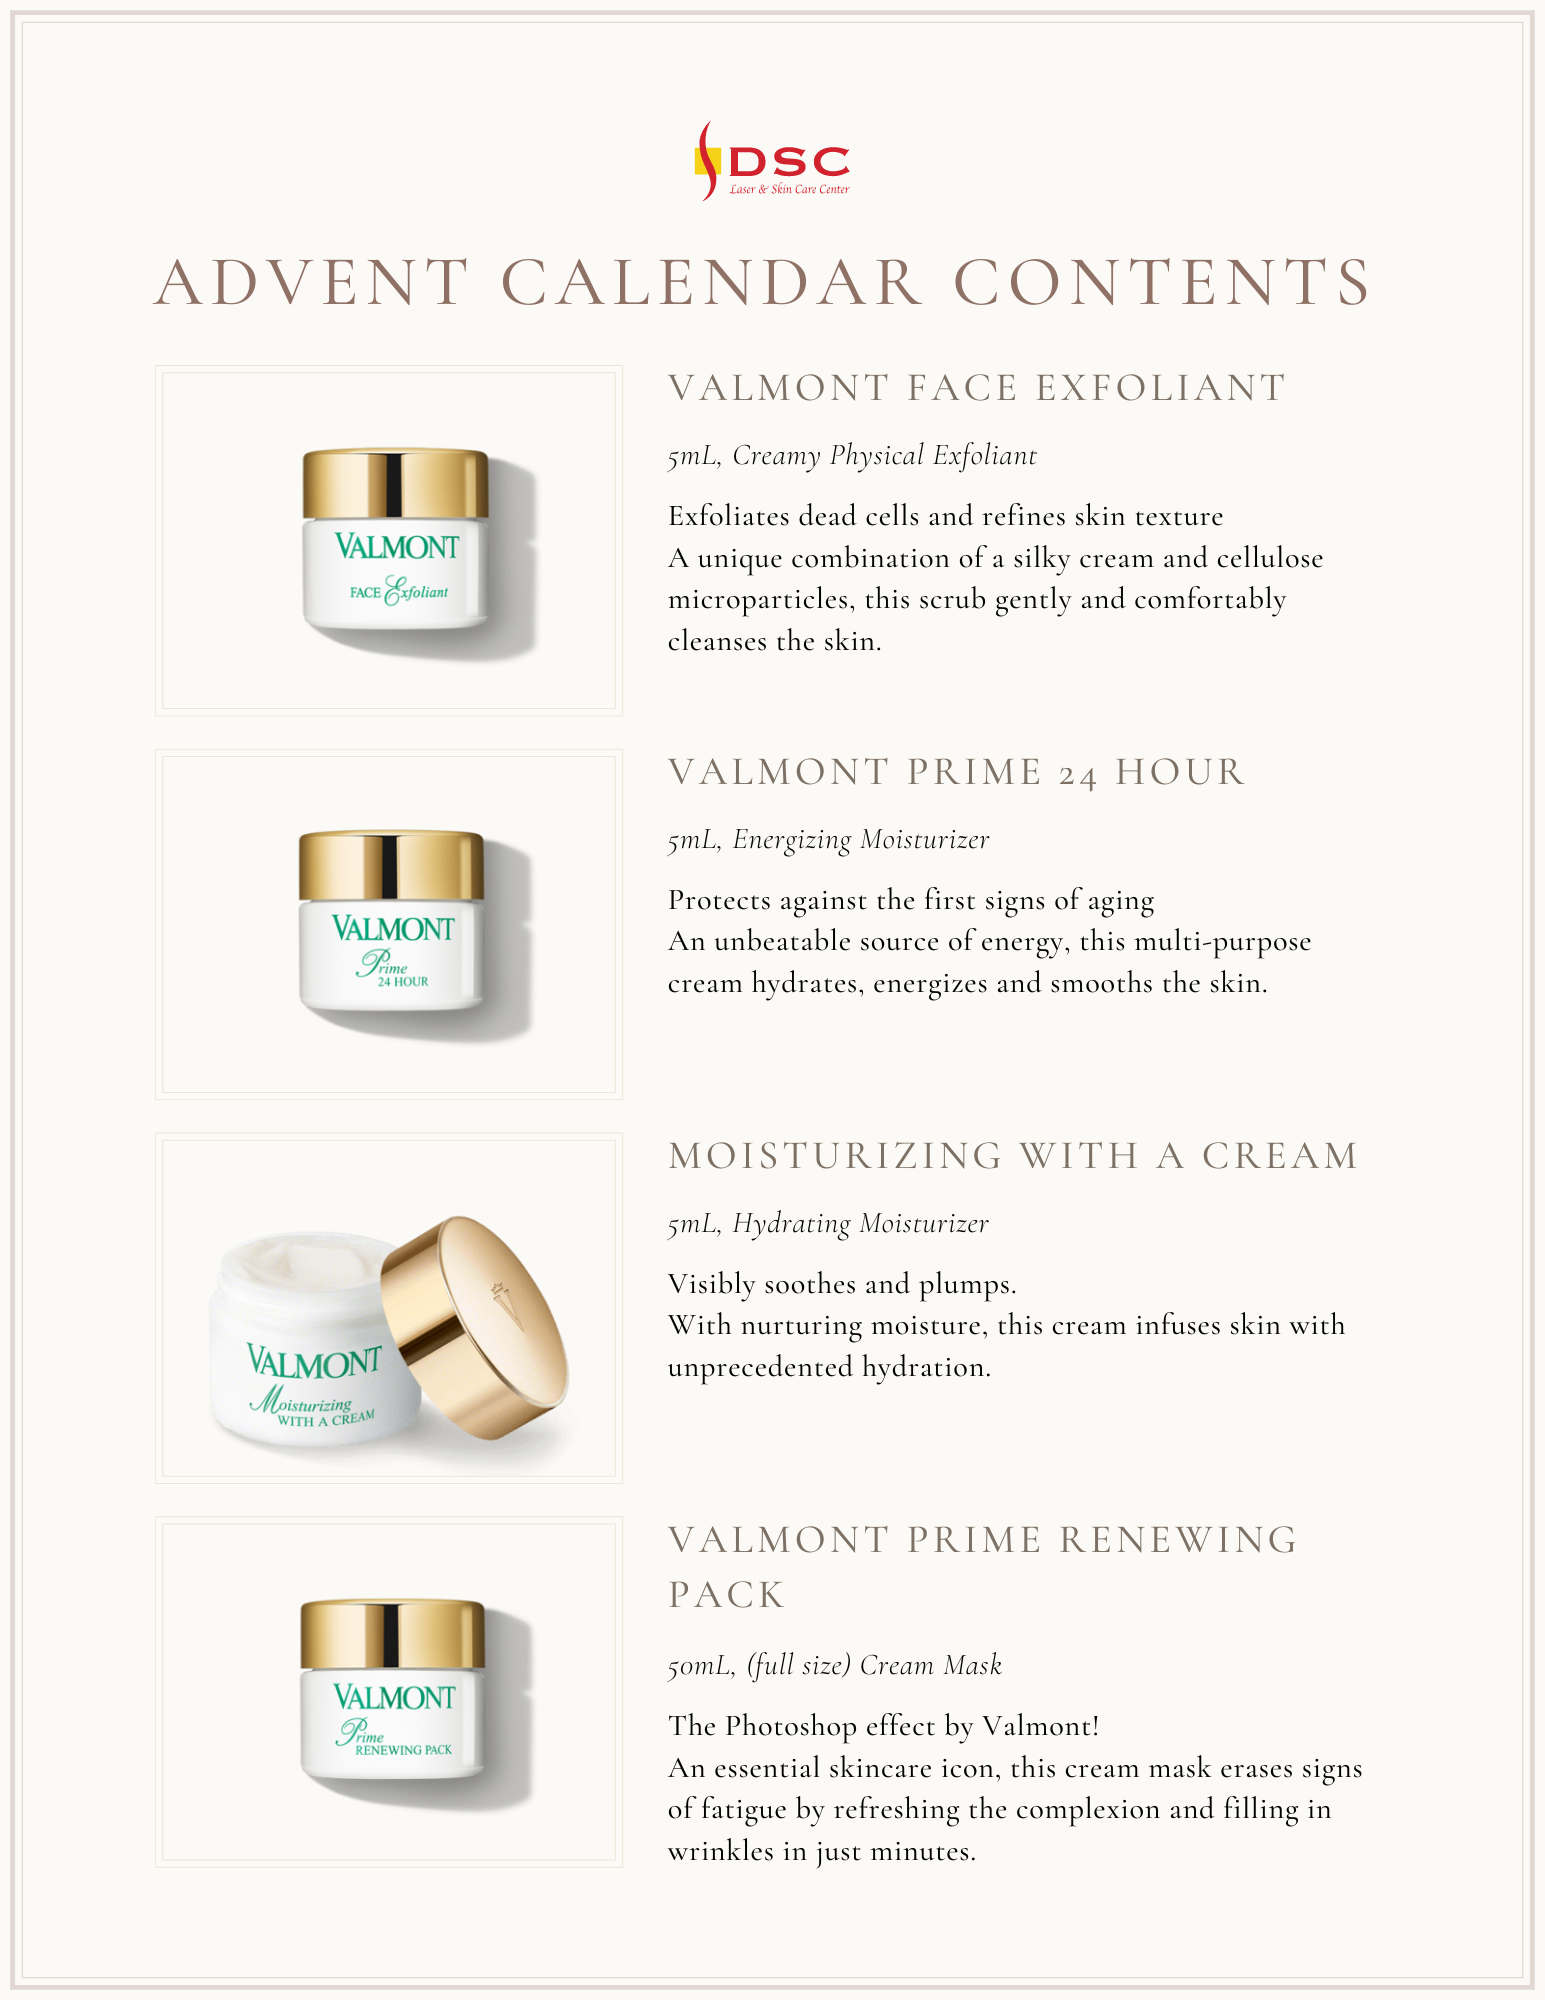 Valmont Cosmetics 2022 advent calendar contents page 1 of 3 with Face Exfoliant, Prime 24 Hour moisturizer, Moisturizing with a Cream moisturizer, and Prime Renewing Pack